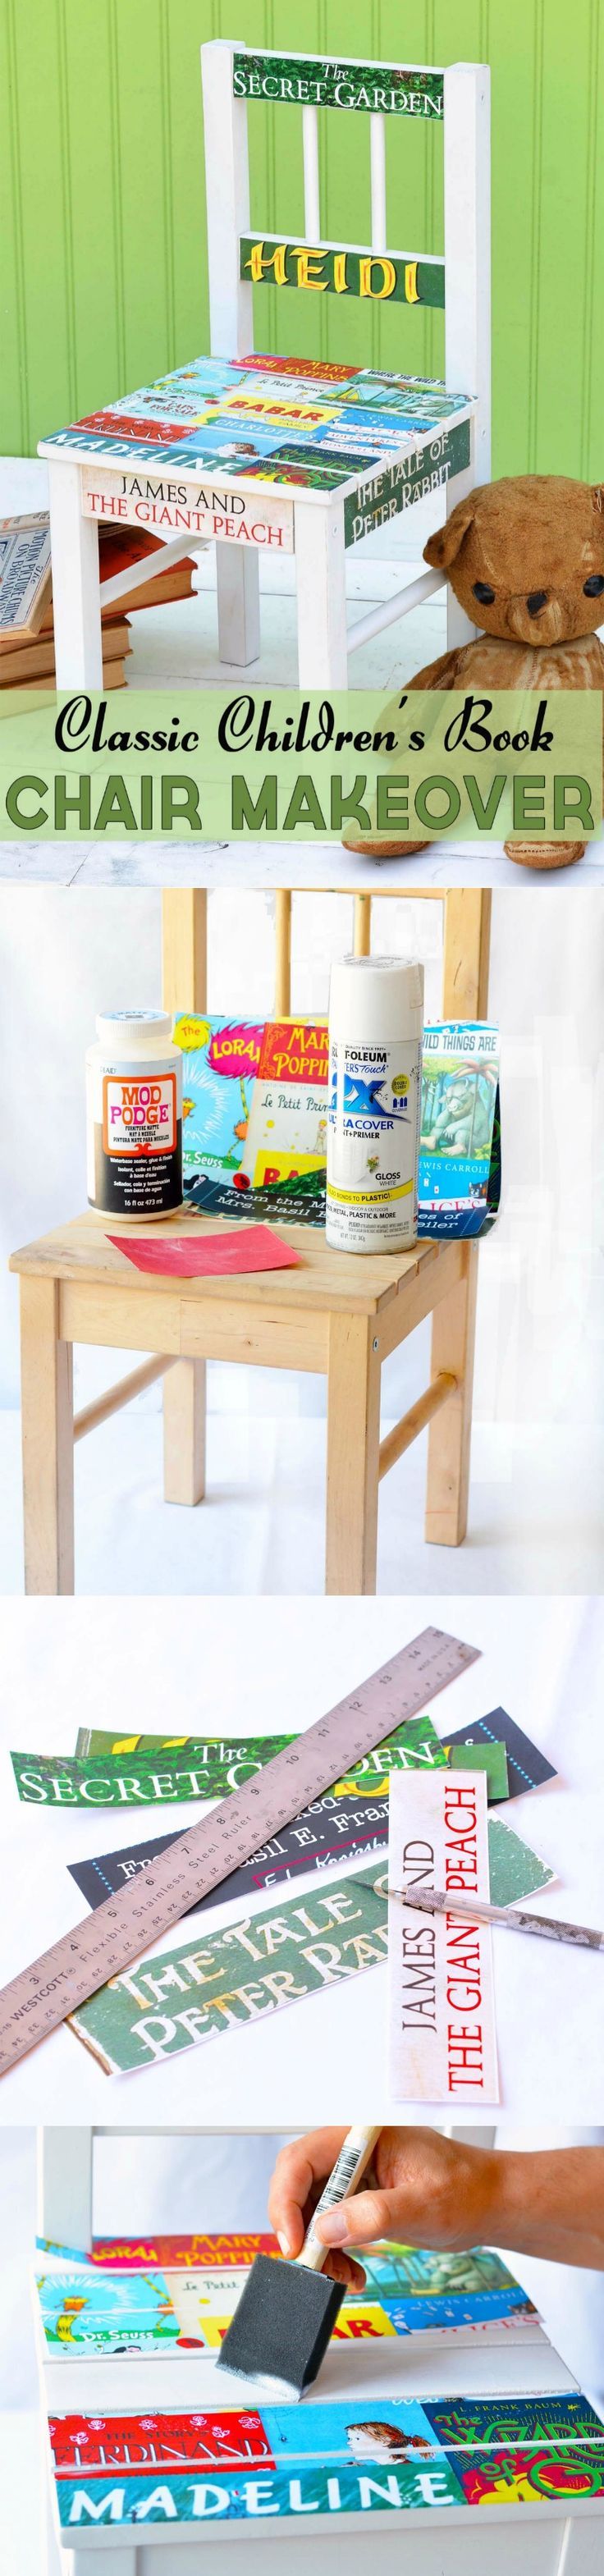 How to Decoupage a Wood Chair for a Book Lover